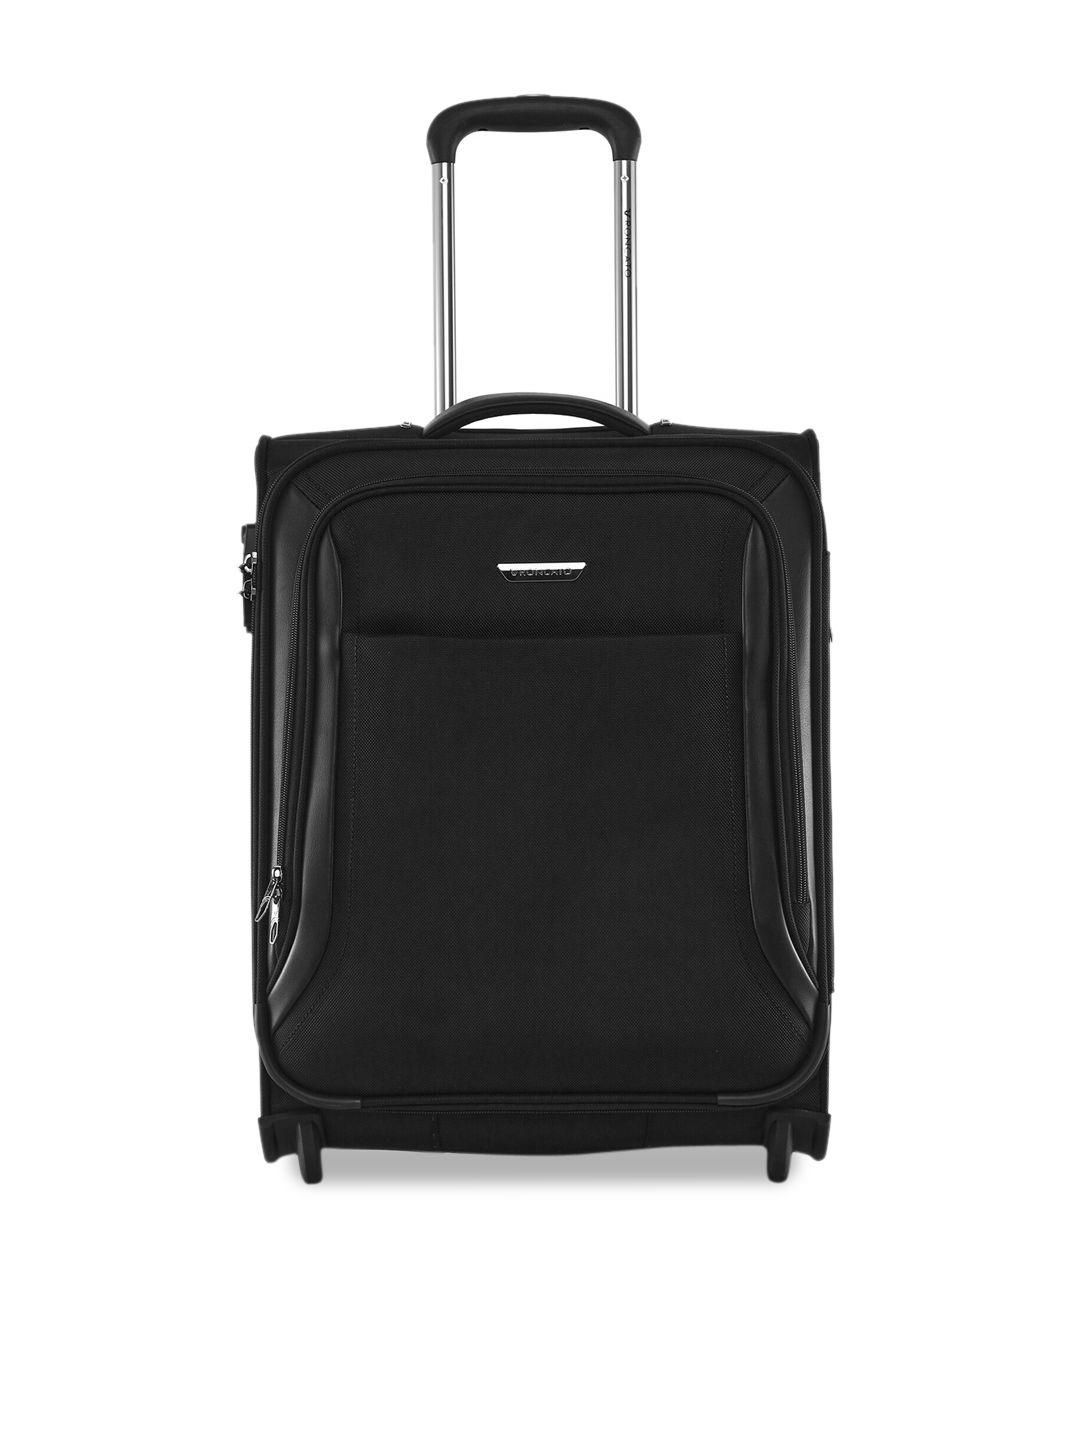 roncato biz 2.0 nero soft-sidded water resistant cabin trolley suitcase